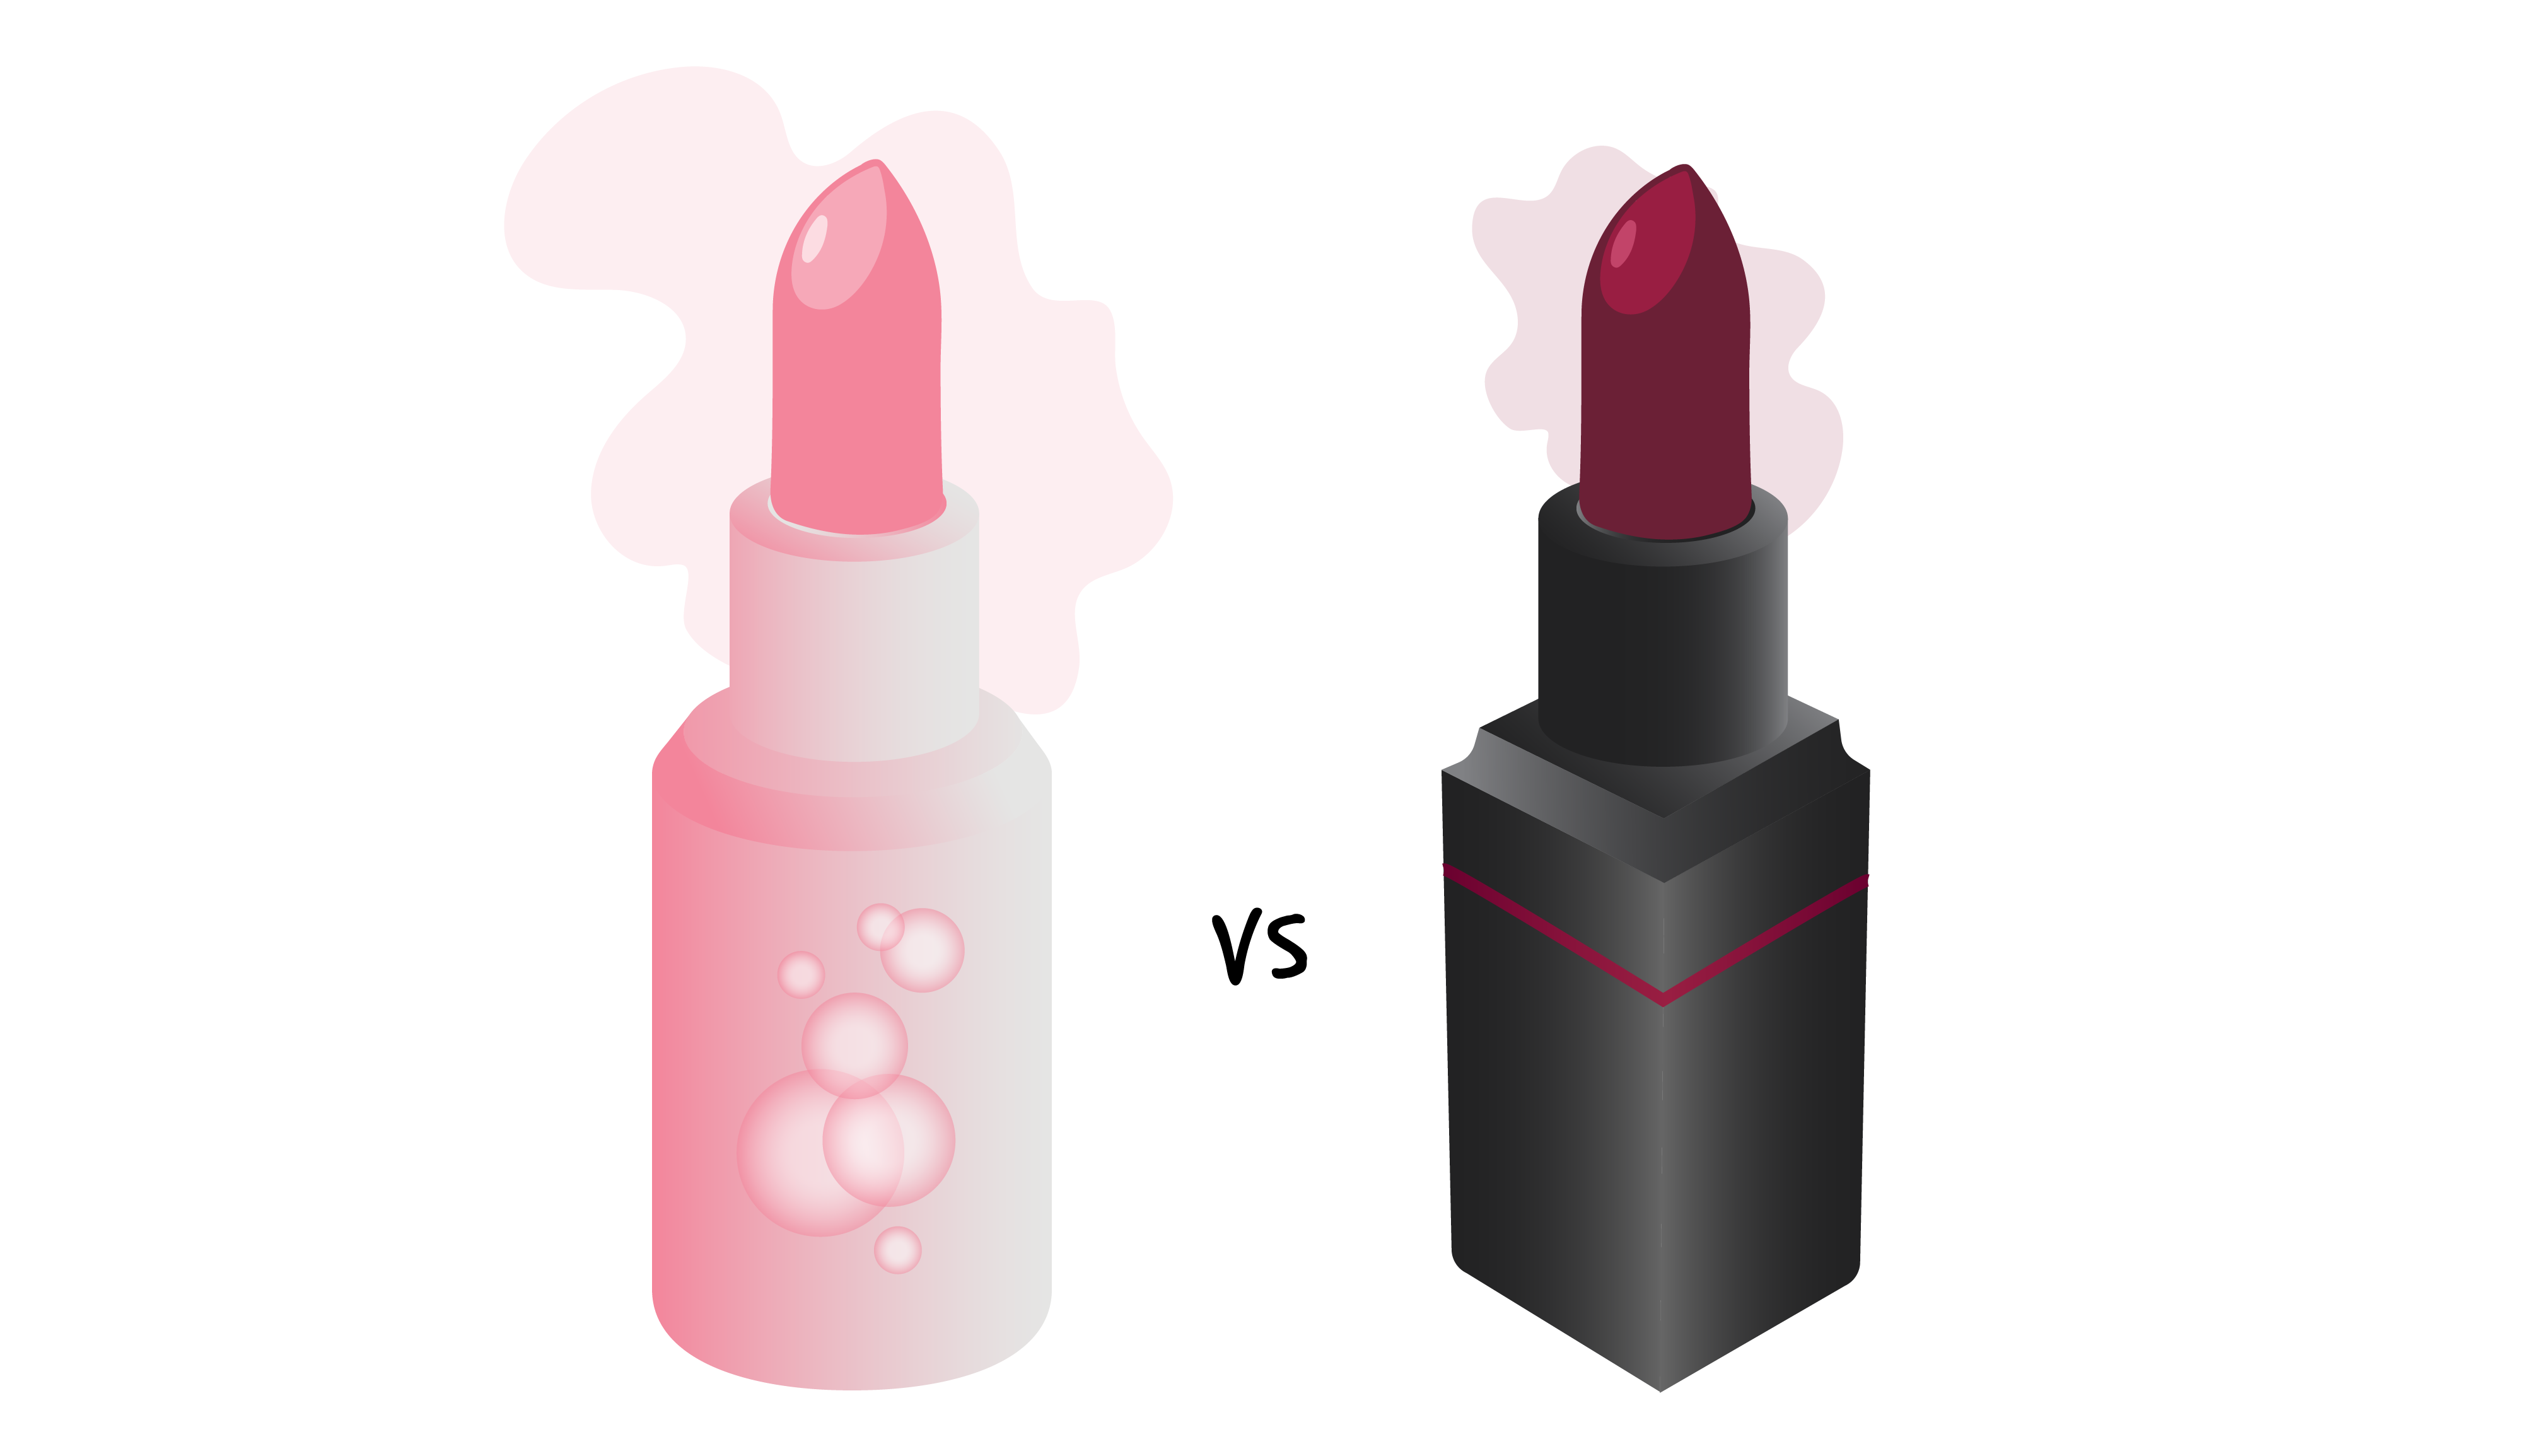 Left: light pink lipstick tube with bubble graphics on the front. Center: versus text. Right: traditional black lipstick tube with burgundy lipstick inside.